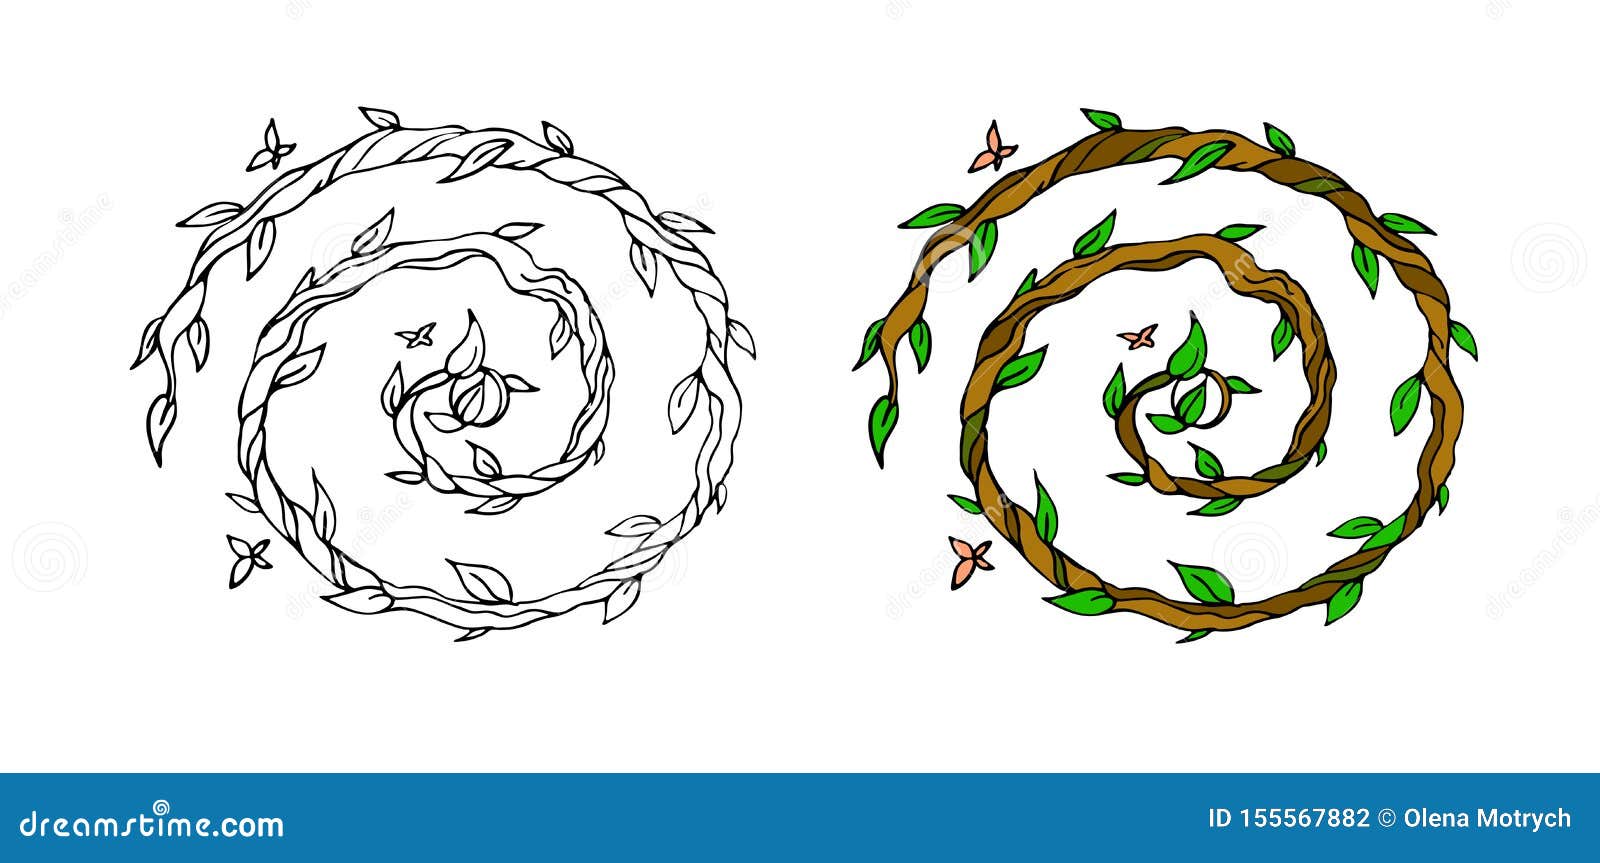 graphic and colored branches with leaves in circle composicion.